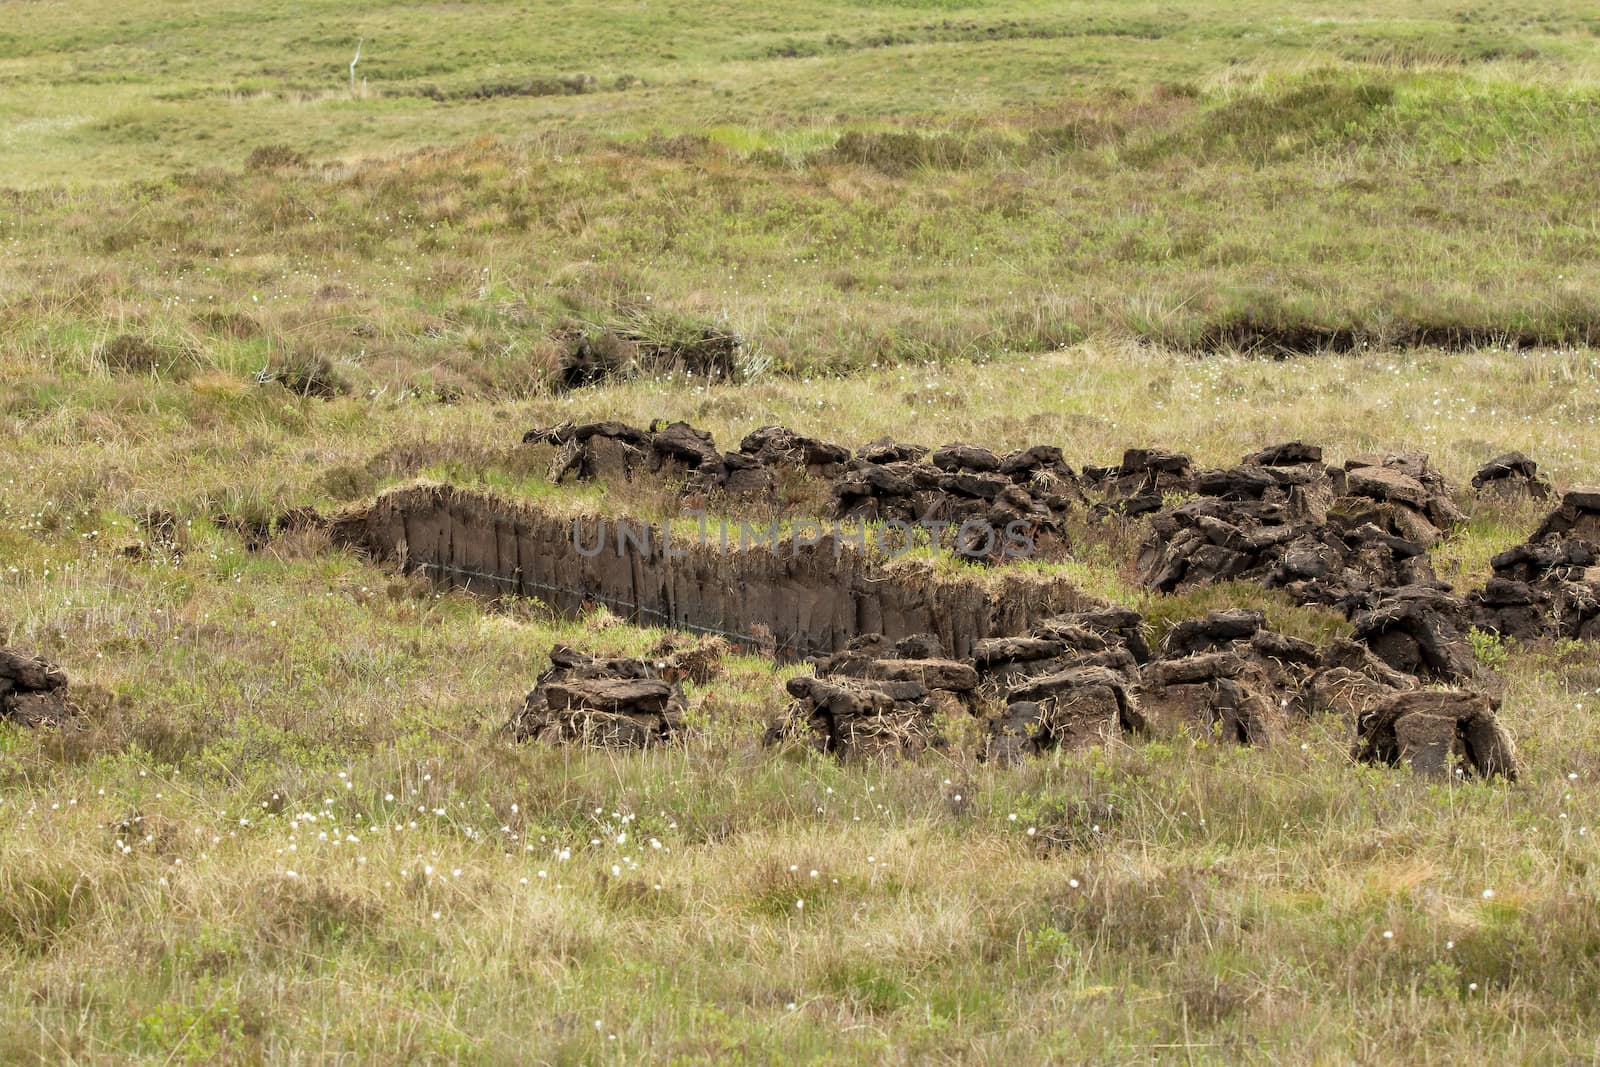 Peat cutting area, showing cut peats drying on moorland